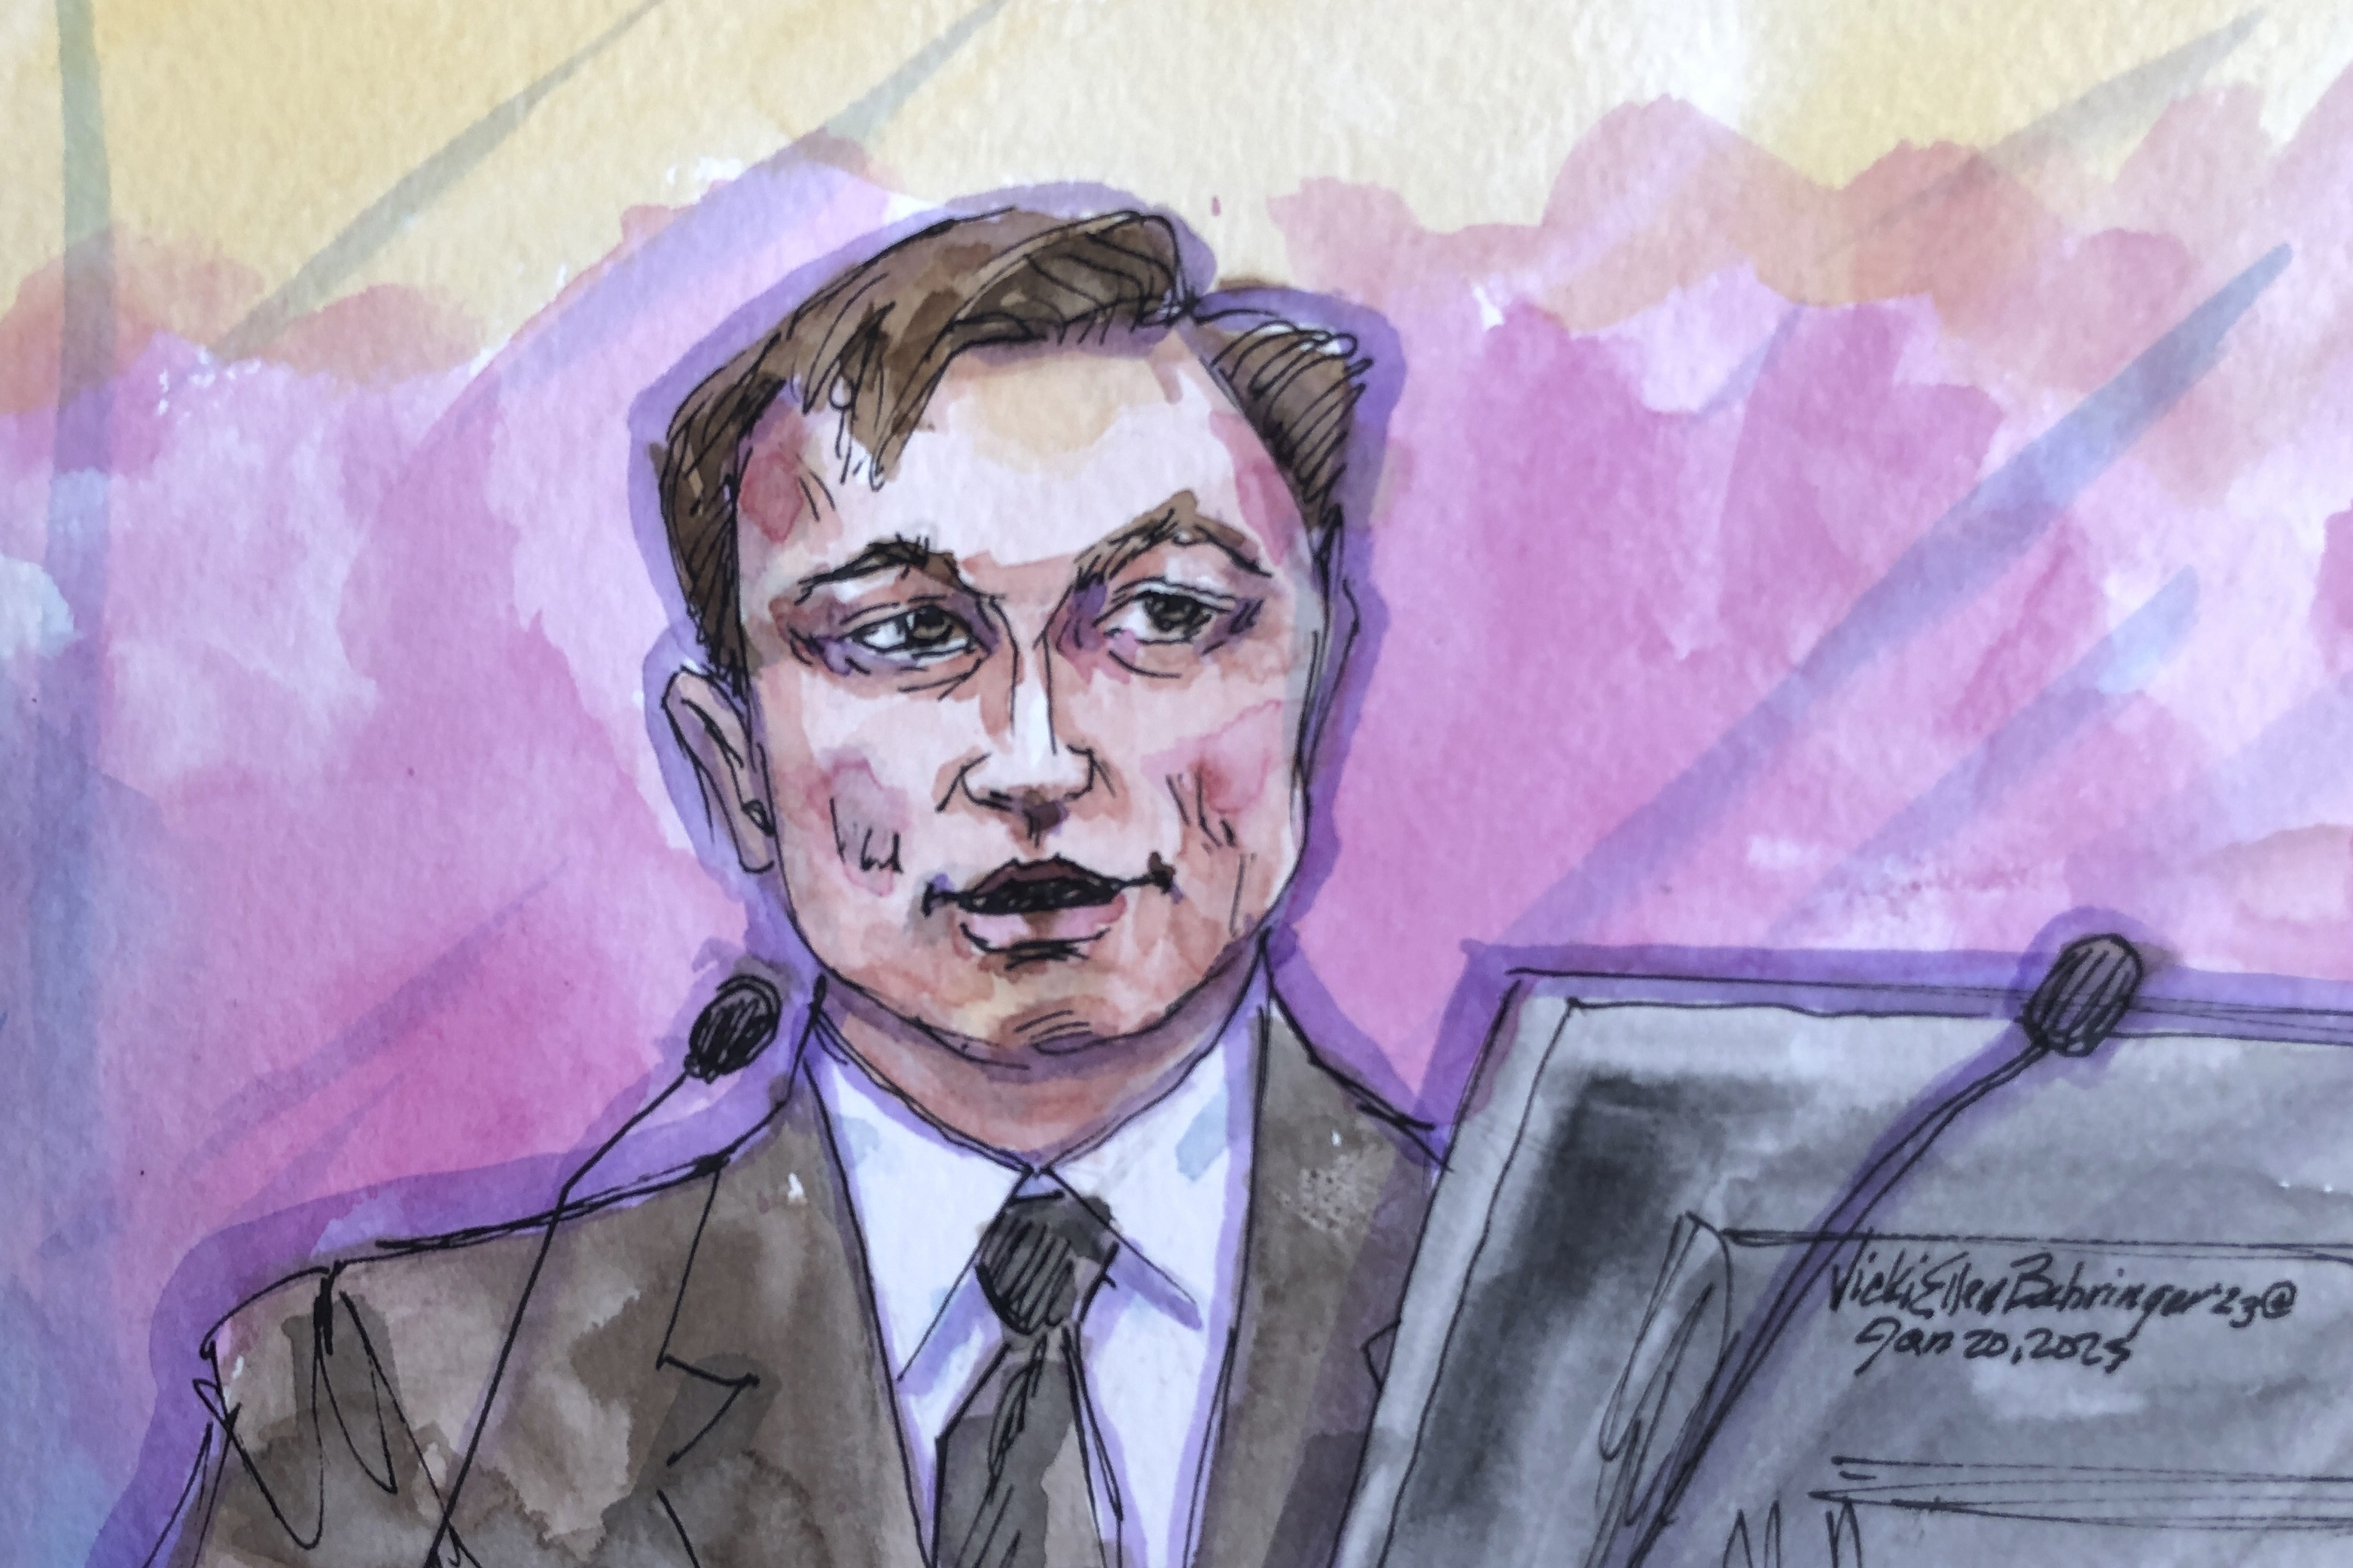 In this courtroom sketch, Elon Musk appears in federal court in San Francisco, Friday, Jan. 20, 2023. Musk took the witness stand to defend a 2018 tweet claiming he had lined up the financing to take Tesla private in a deal that never came close to happening. The tweet resulted in a $40 million settlement with securities regulators. It also led to a class-action lawsuit alleging he misled investors, pulling him into court Friday. (Vicki Behringer via AP)